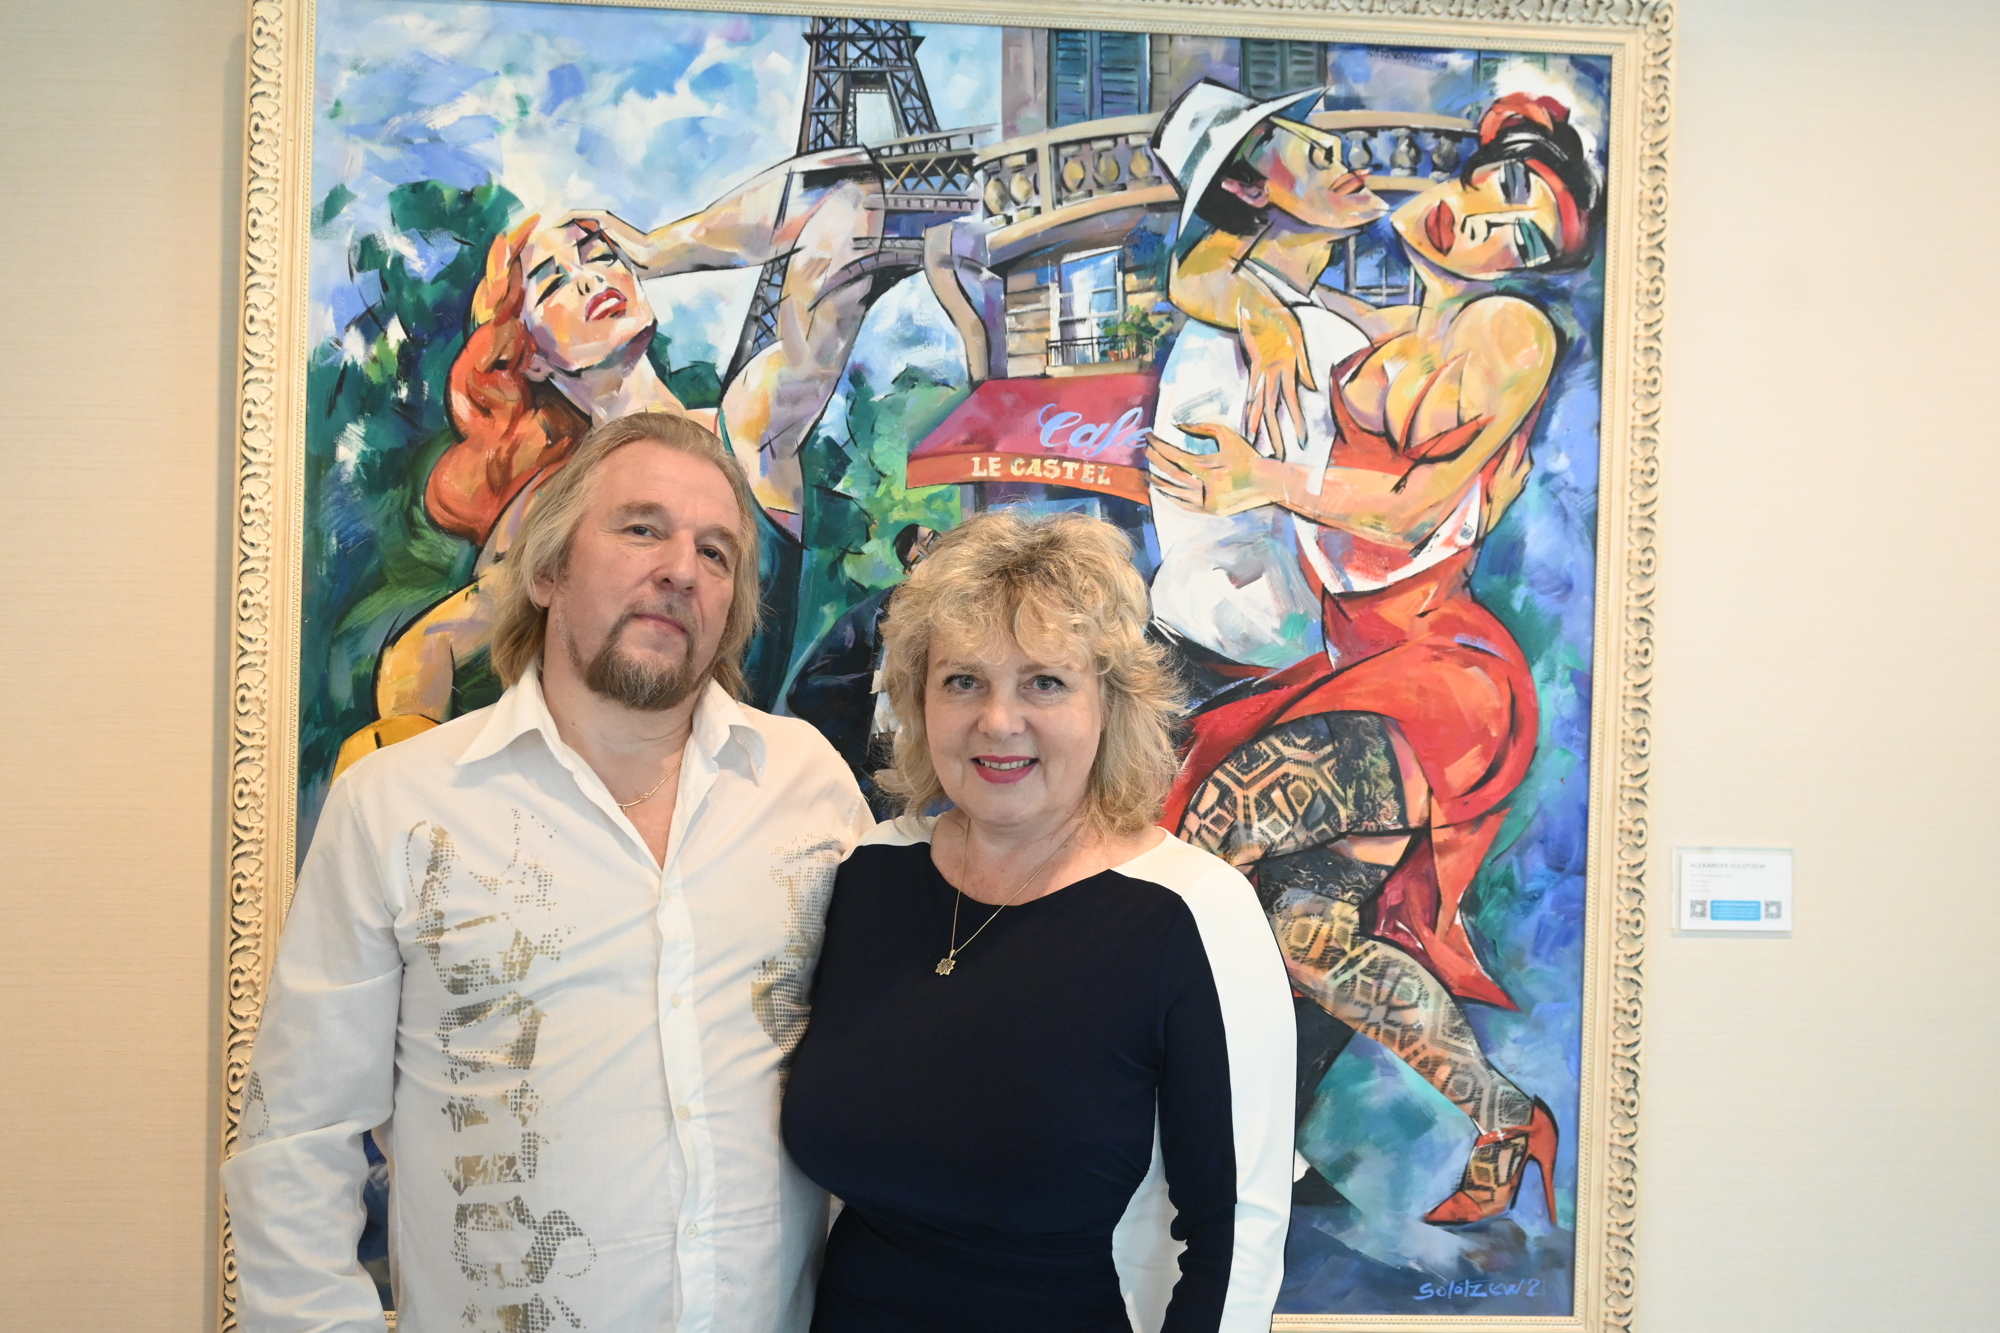 Alexander Solotzew and his wife Marina are excited for his opening at Art Ovation. (Photo: Spencer Fordin)